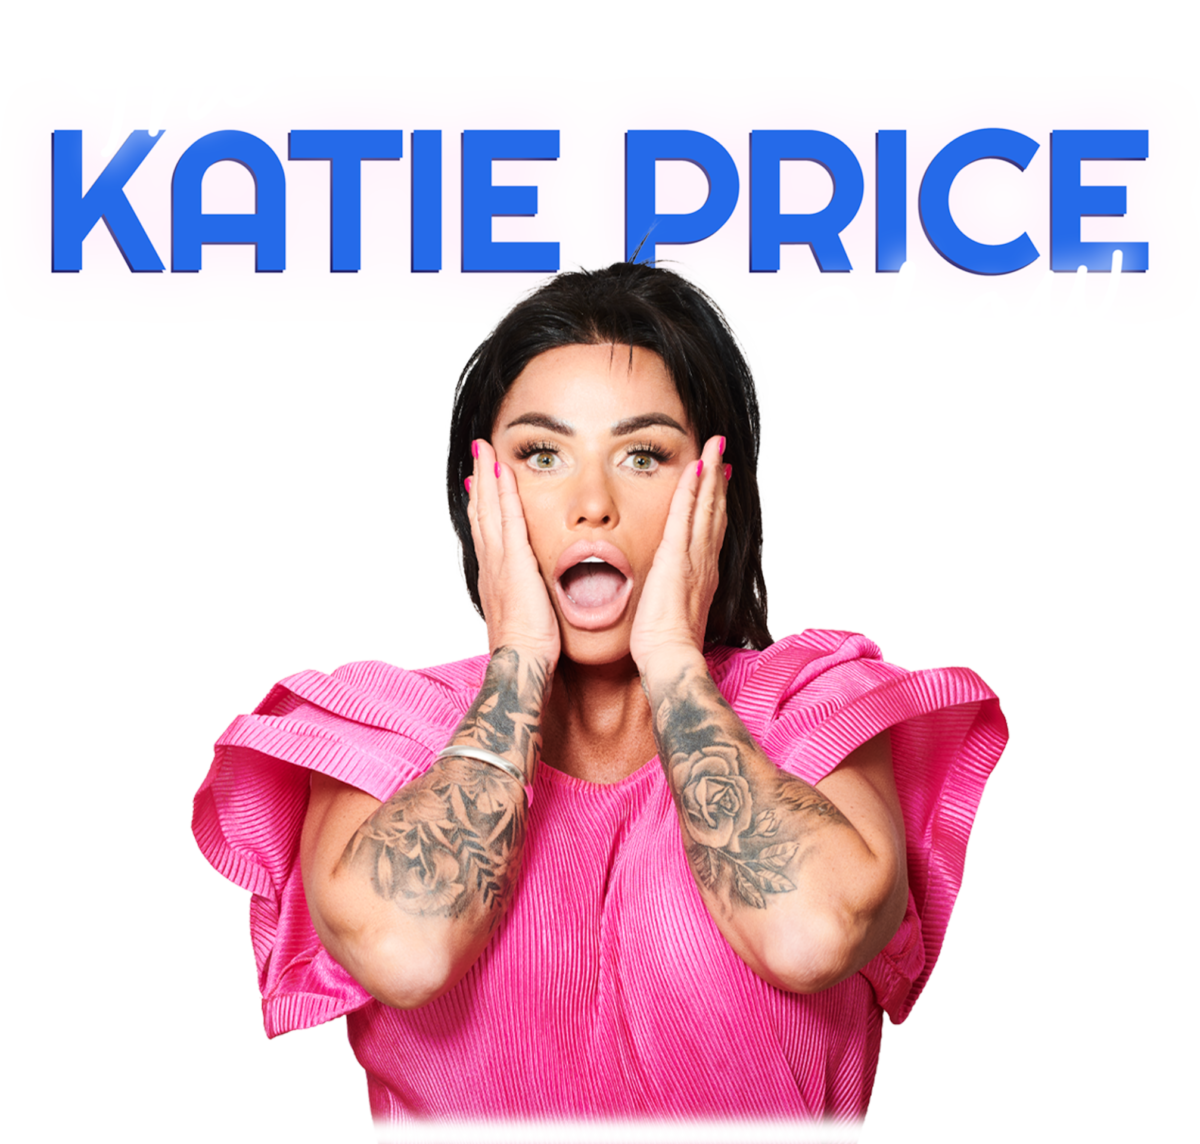 The Katie Price Show Crowd Network